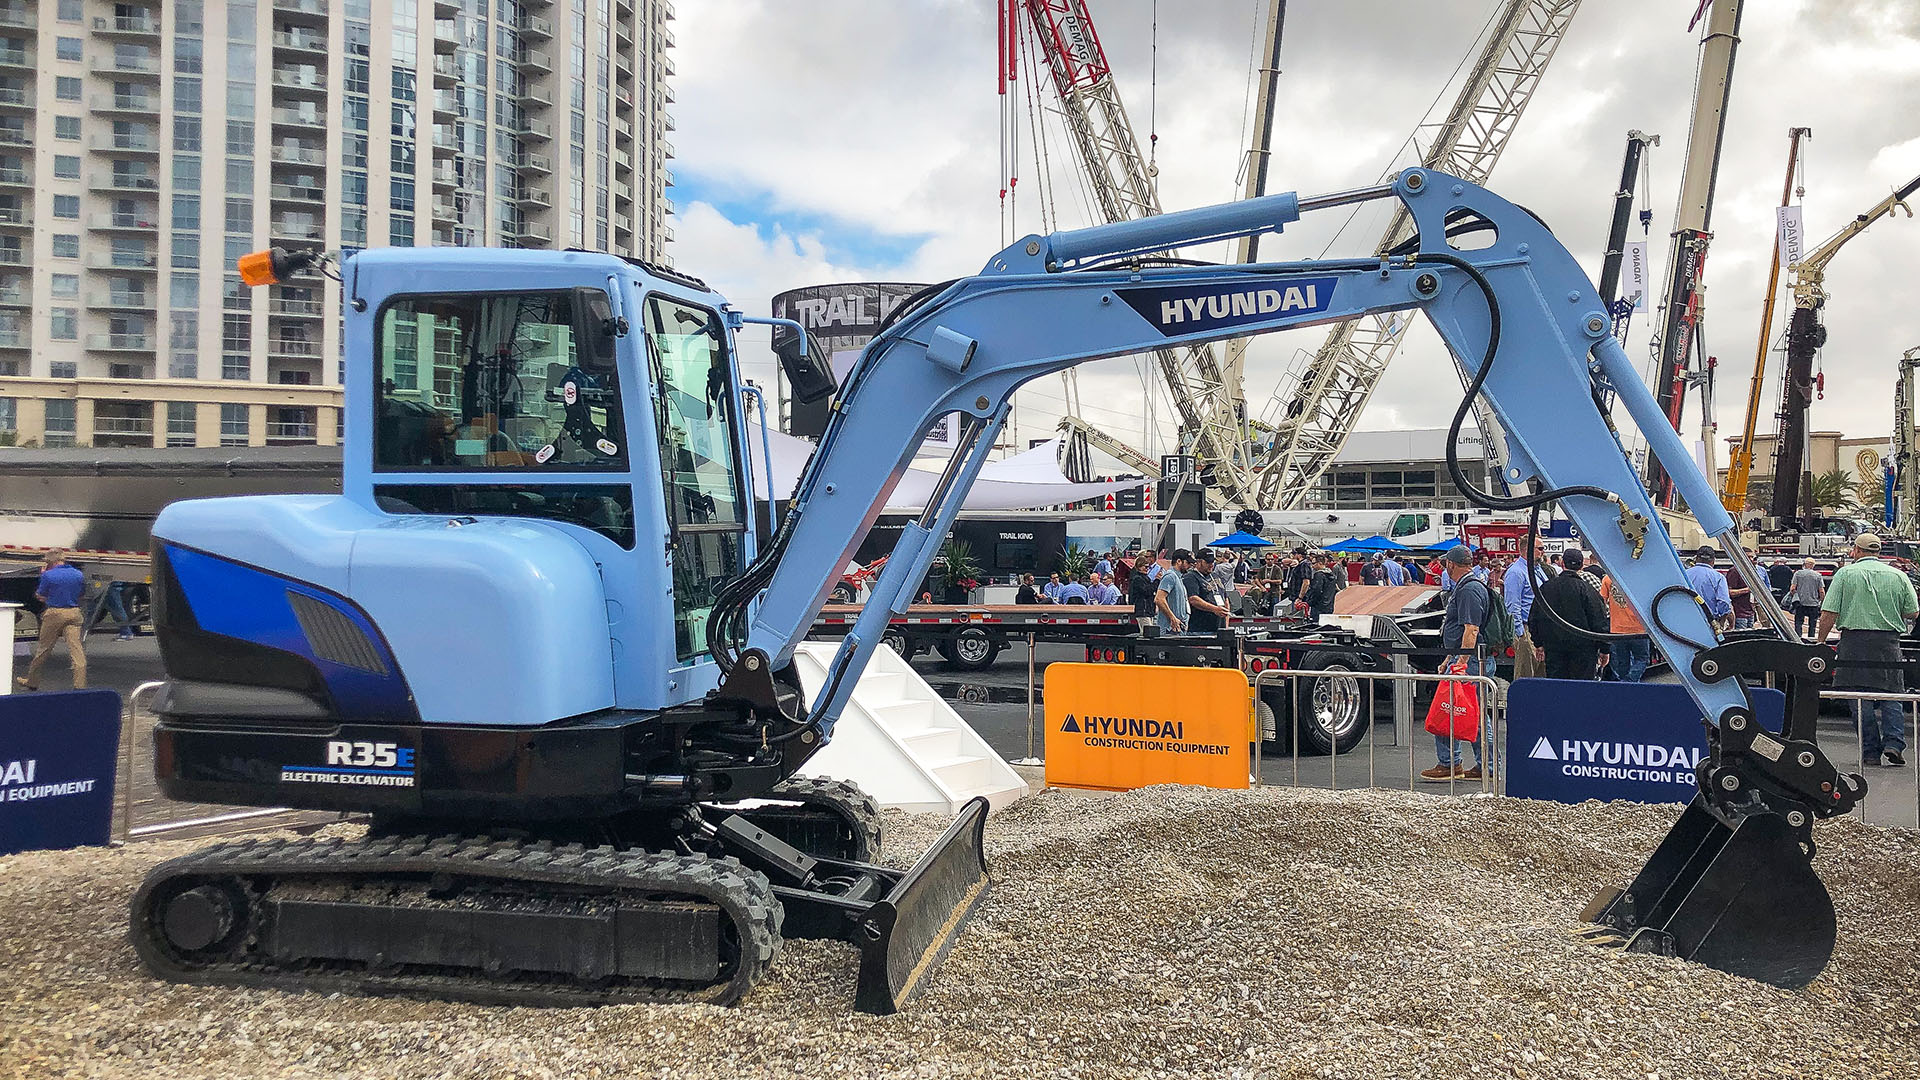 Hyundai Demonstrates Electric-Powered Compact Excavators at CONEXPO-CON/AGG 2020